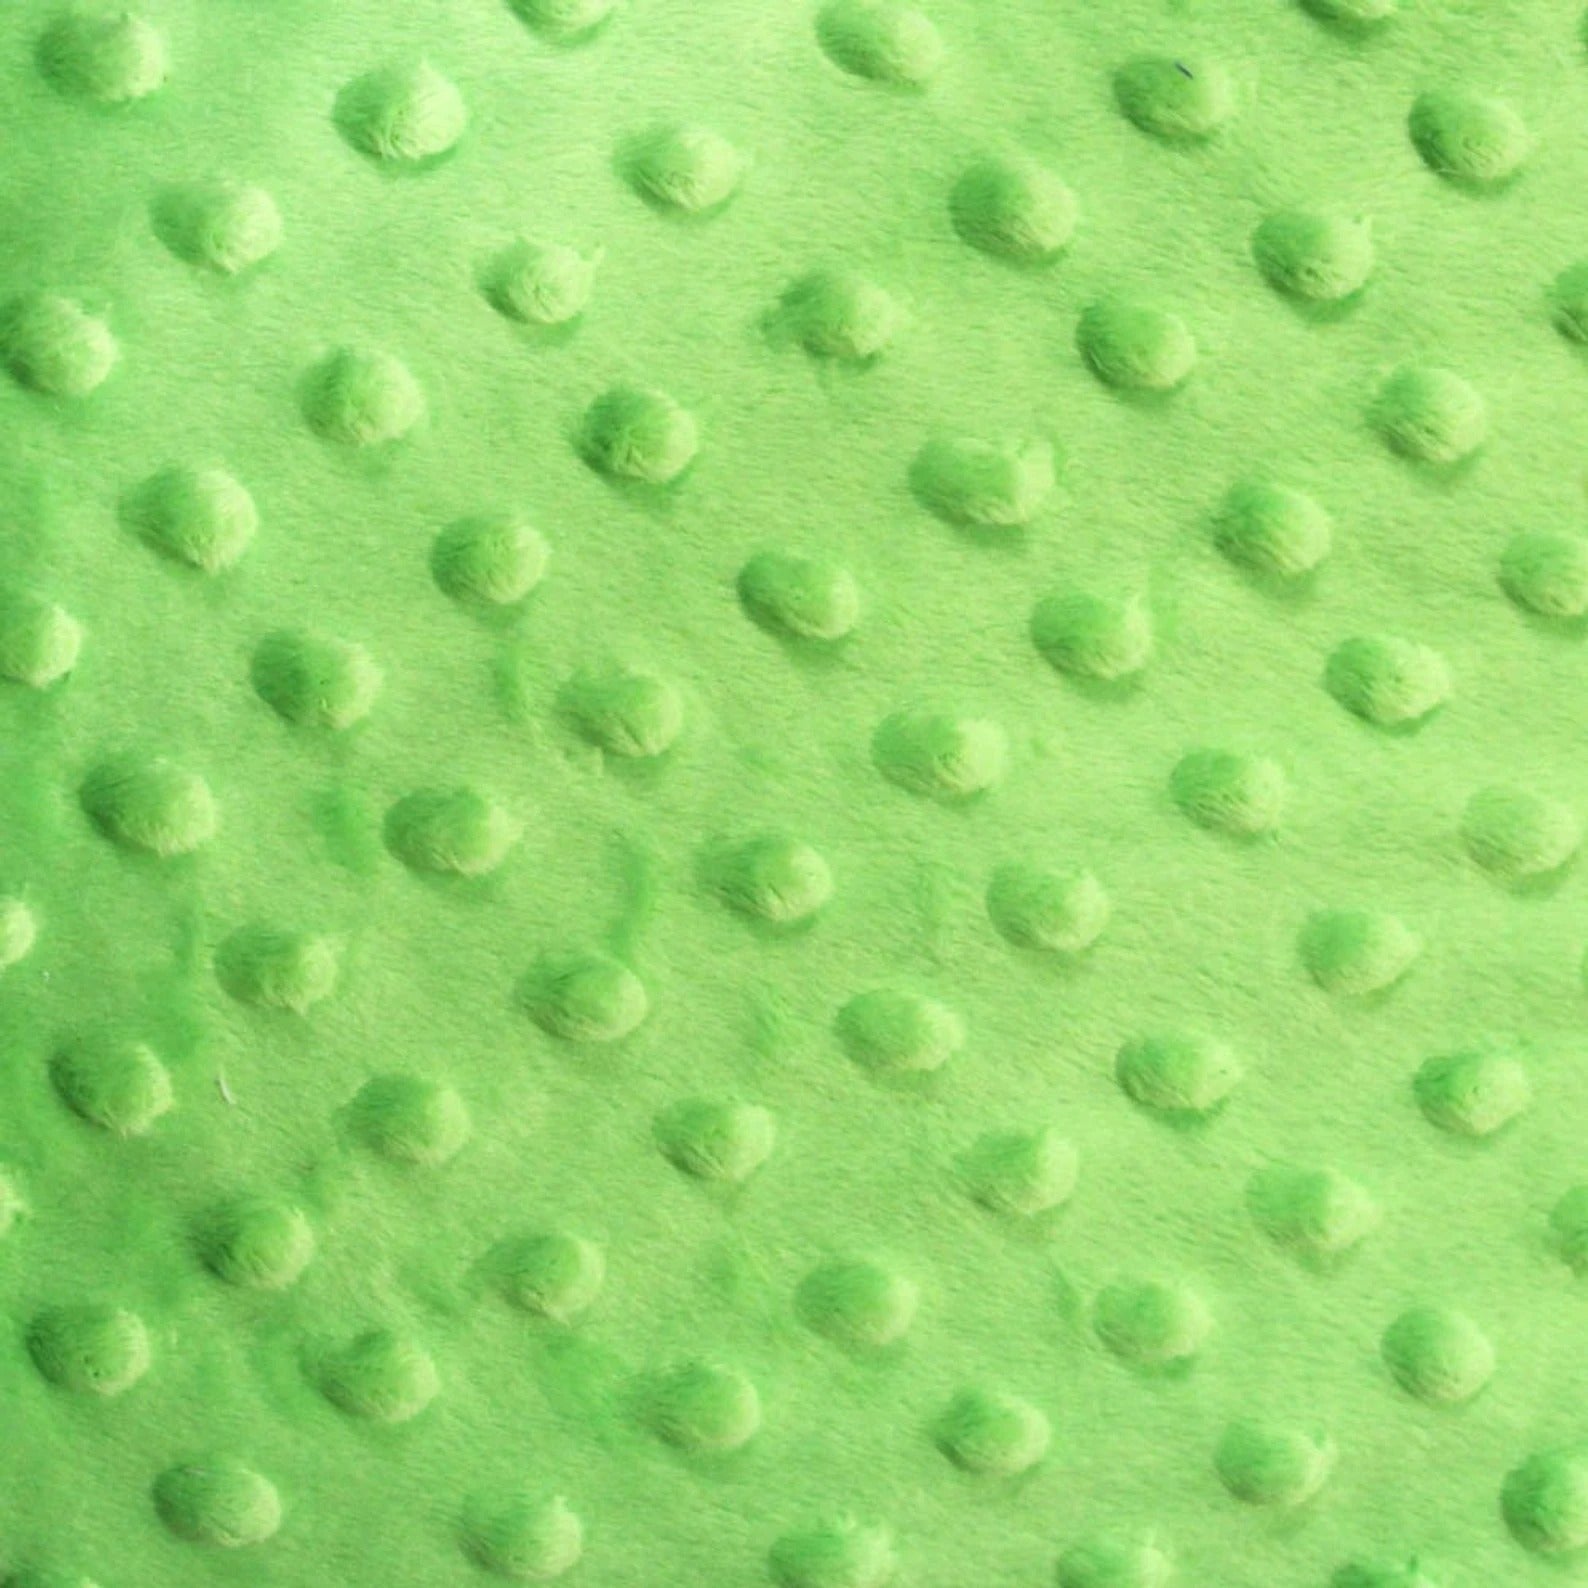 Dimple Dot Minky Fabric Sold By The Yard - 36"/ 58" Lime Green